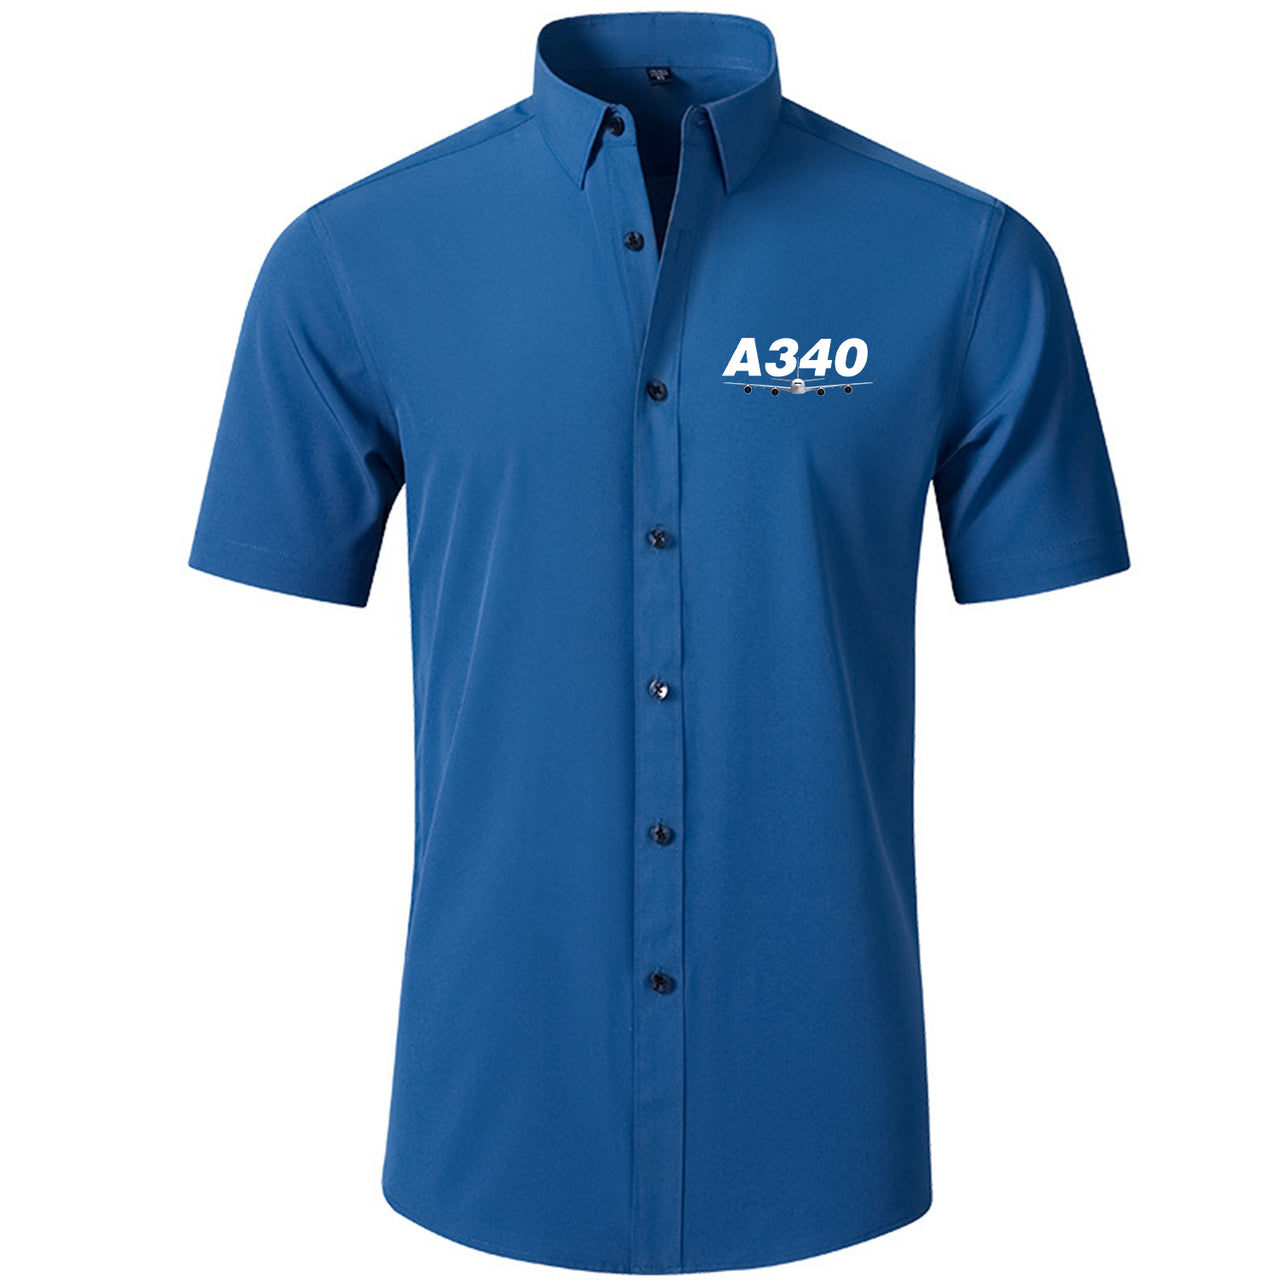 Super Airbus A340 Designed Short Sleeve Shirts